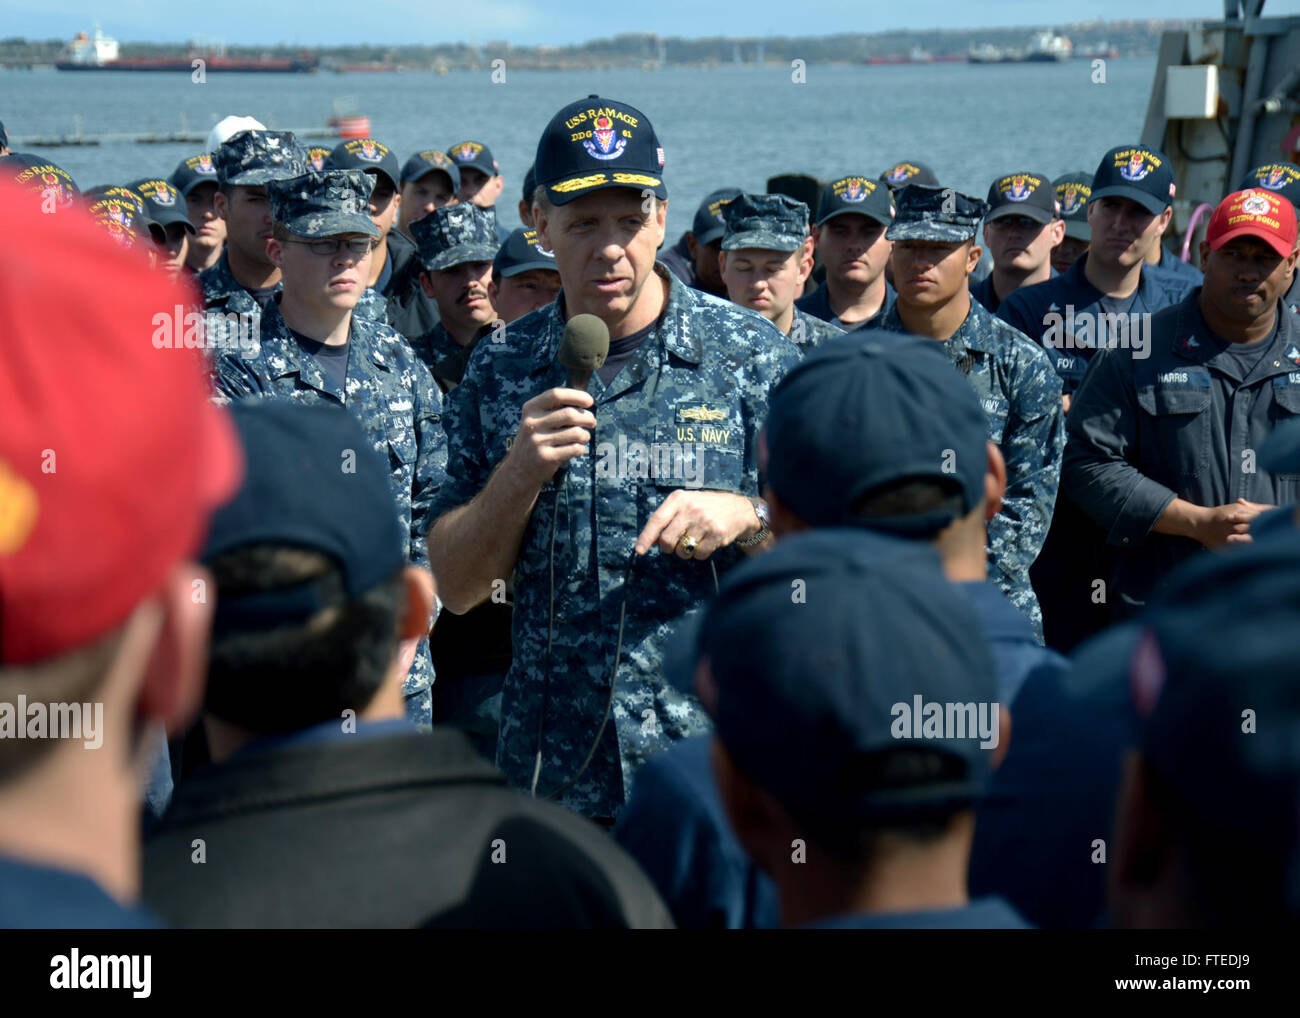 140417-N-CH661-179: AUGUSTA BAY, Italy (April 17, 2014) - Vice Adm. Phil Davidson, commander, U.S. 6th Fleet, addresses the crew of the guided-missile destroyer USS Ramage (DDG 61) during an all-hands call. Ramage, homeported in Norfolk, Va., is on a scheduled deployment supporting maritime security operations and theater security cooperation efforts in the U.S. 6th Fleet area of operations. (U.S. Navy photo by Mass Communication Specialist 2nd Class Jared King/Released)  Join the conversation on Twitter ( https://twitter.com/naveur navaf )  follow us on Facebook ( https://www.facebook.com/USN Stock Photo